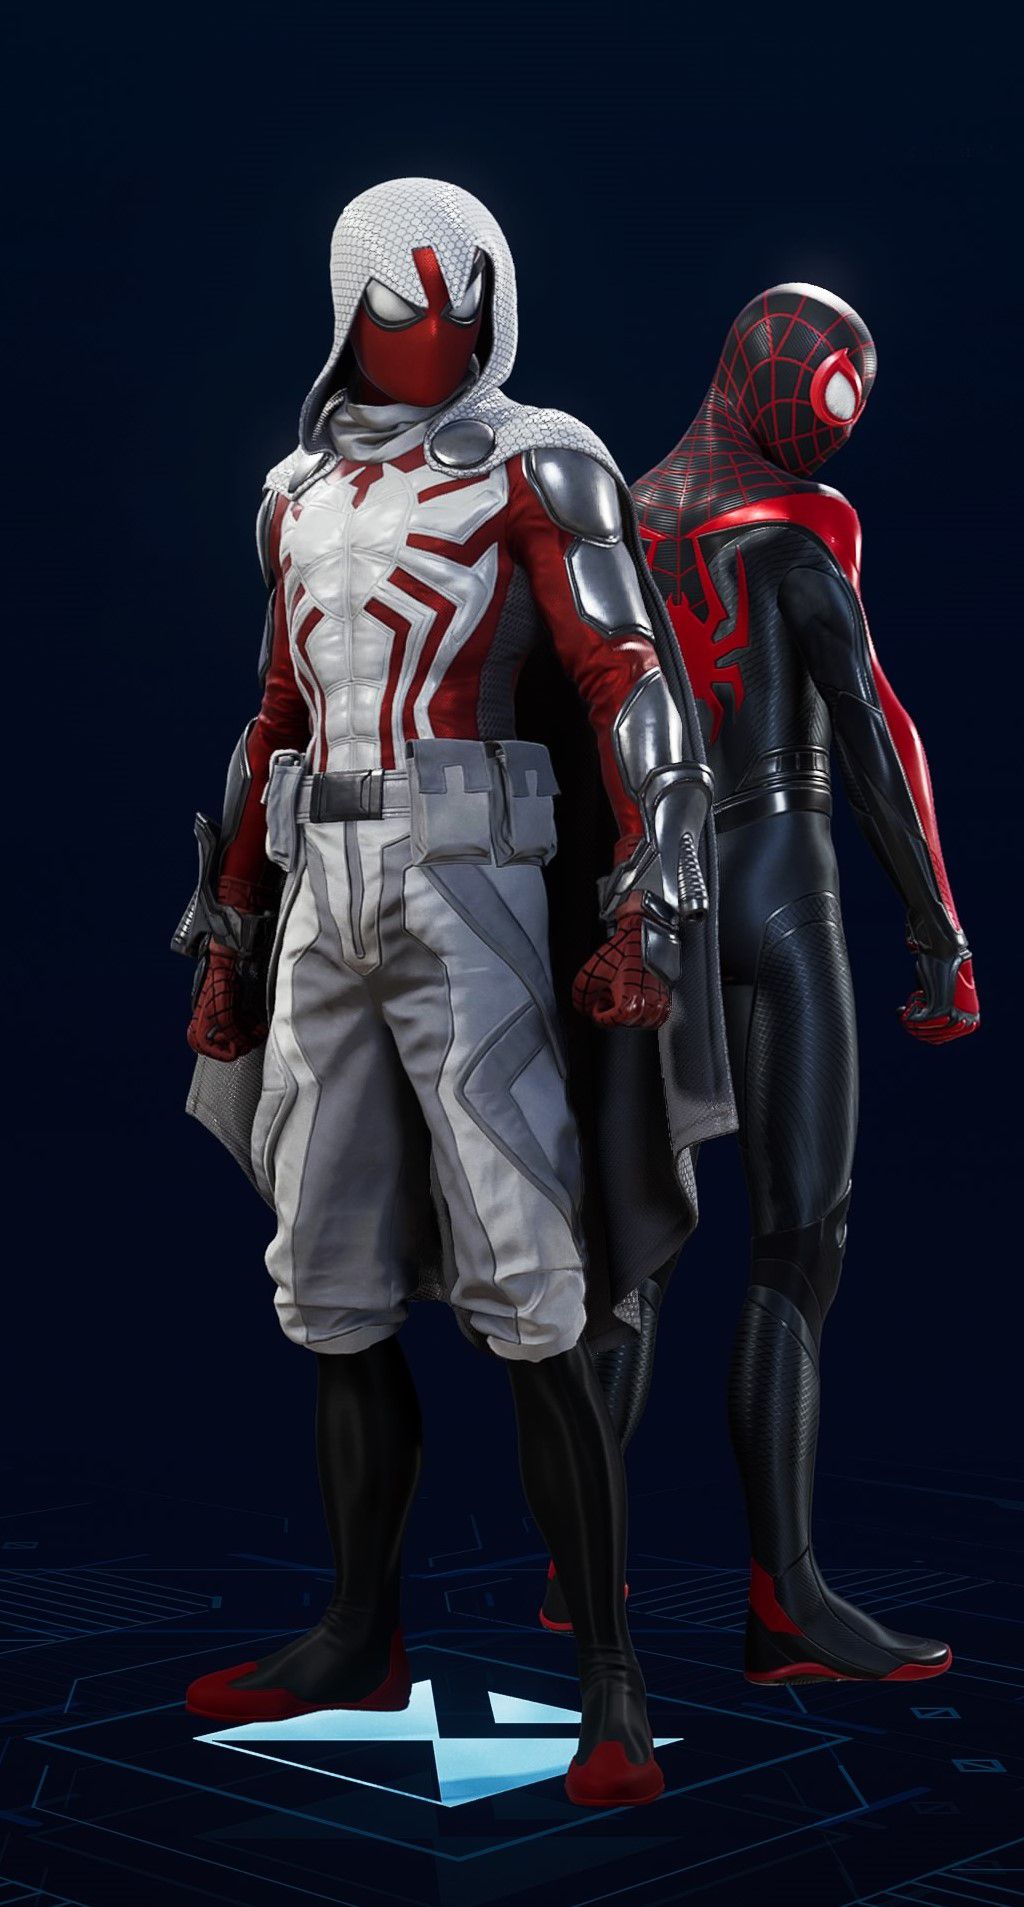 Peter Parker stands in his Arachknight Suit in the suit selection screen of Spider-Man 2.